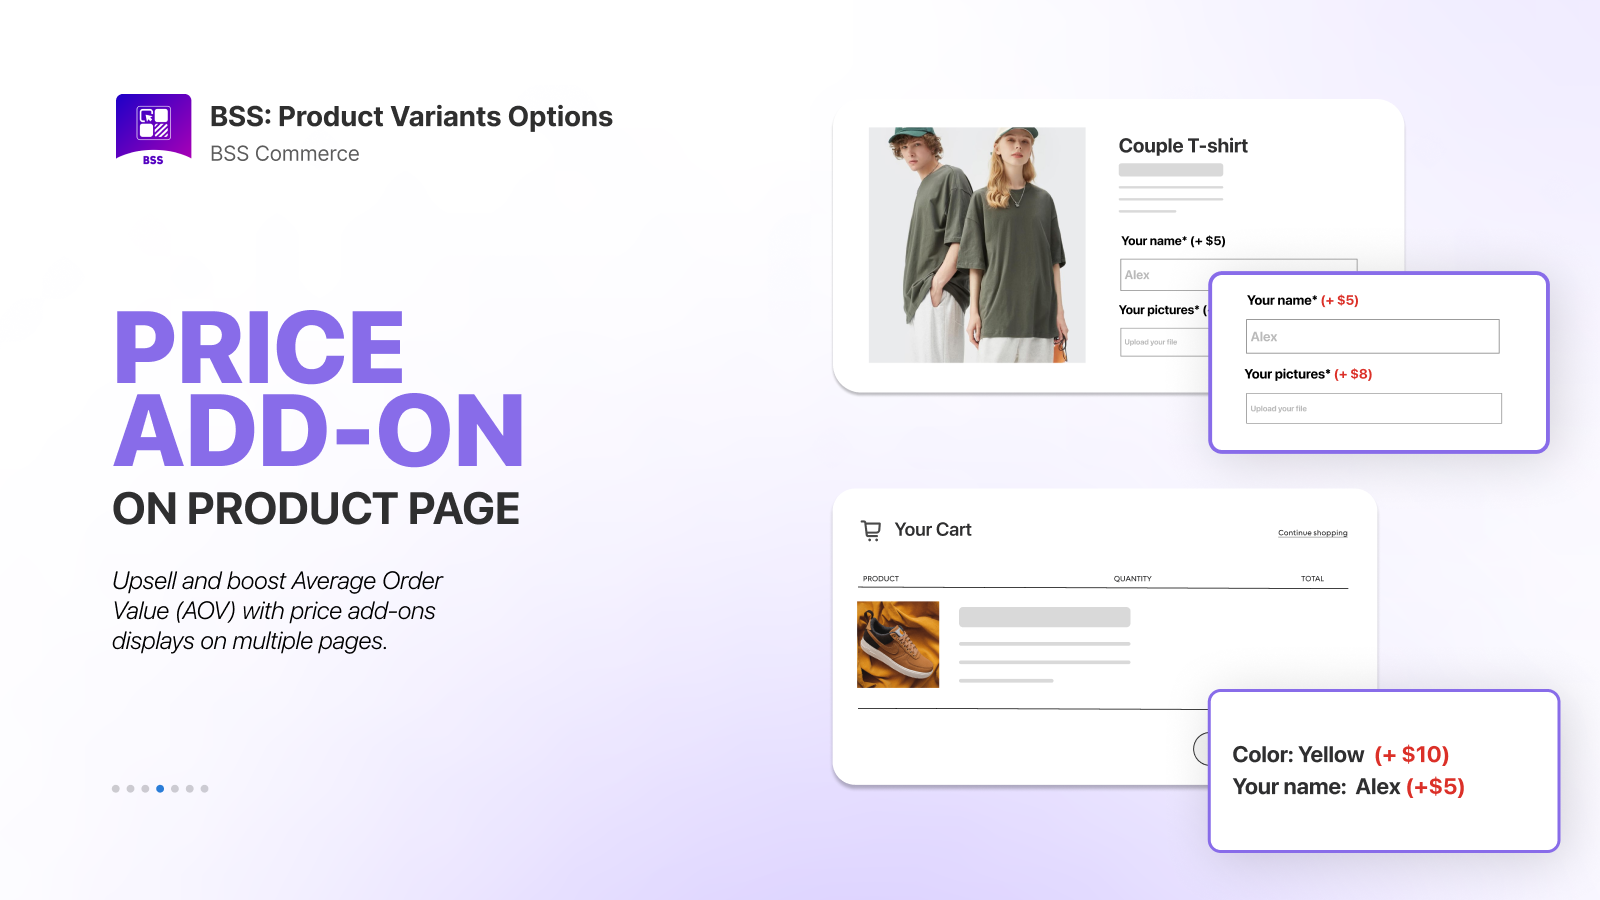 Price Add-on - Add fee to the product price when select option